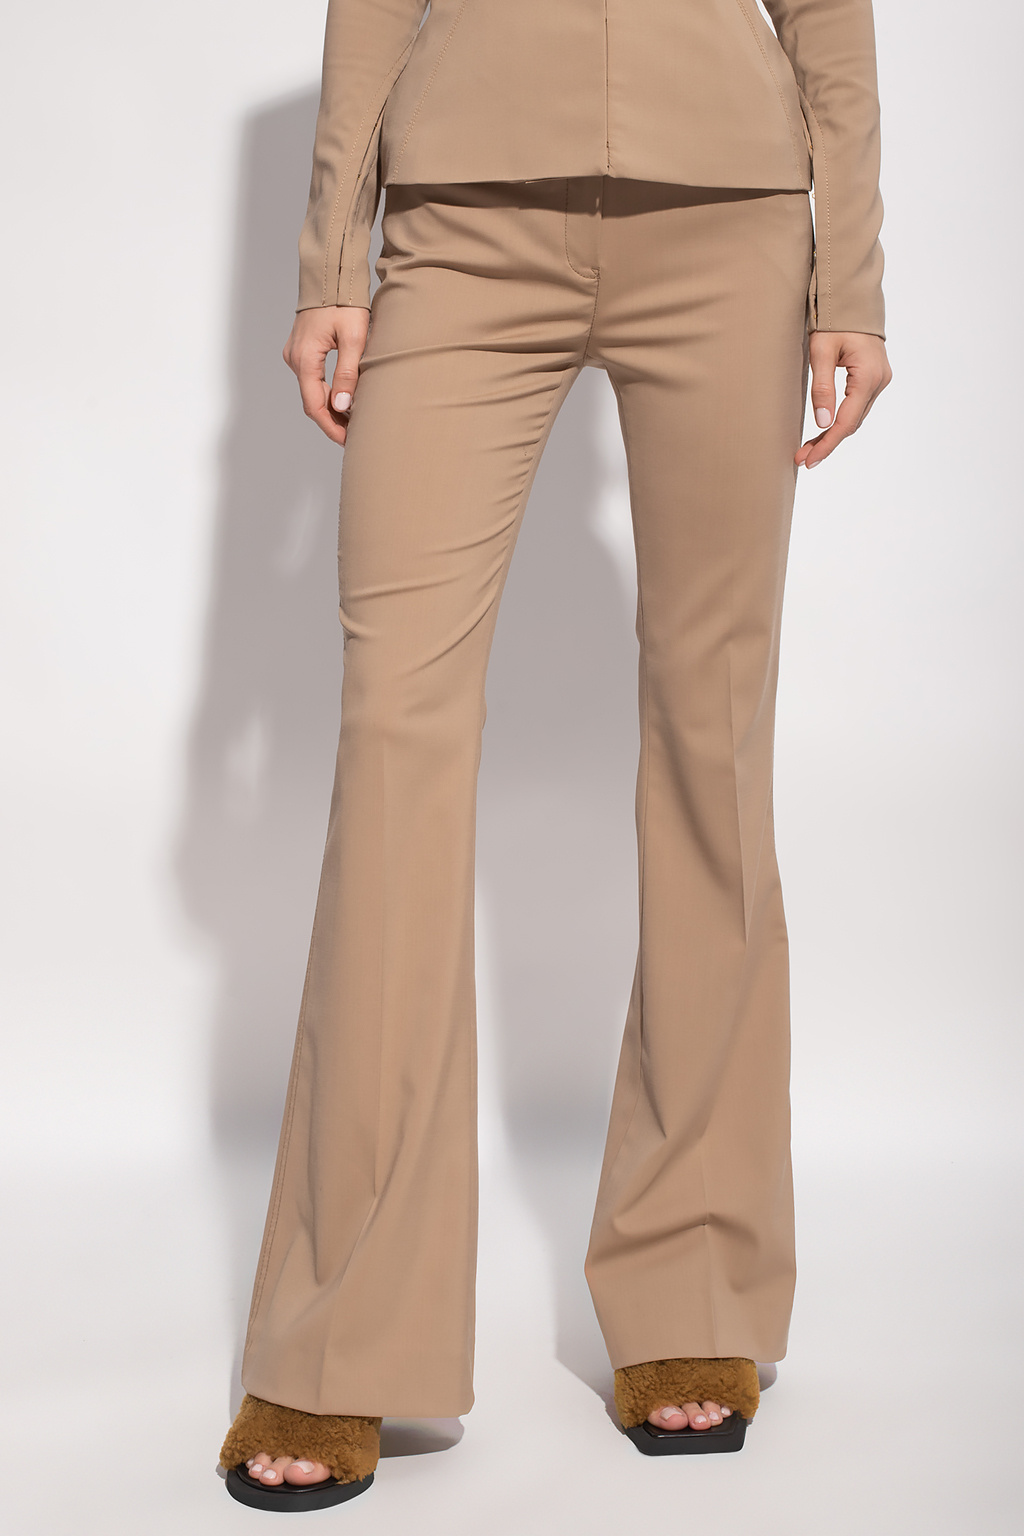 Jacquemus Flared trousers